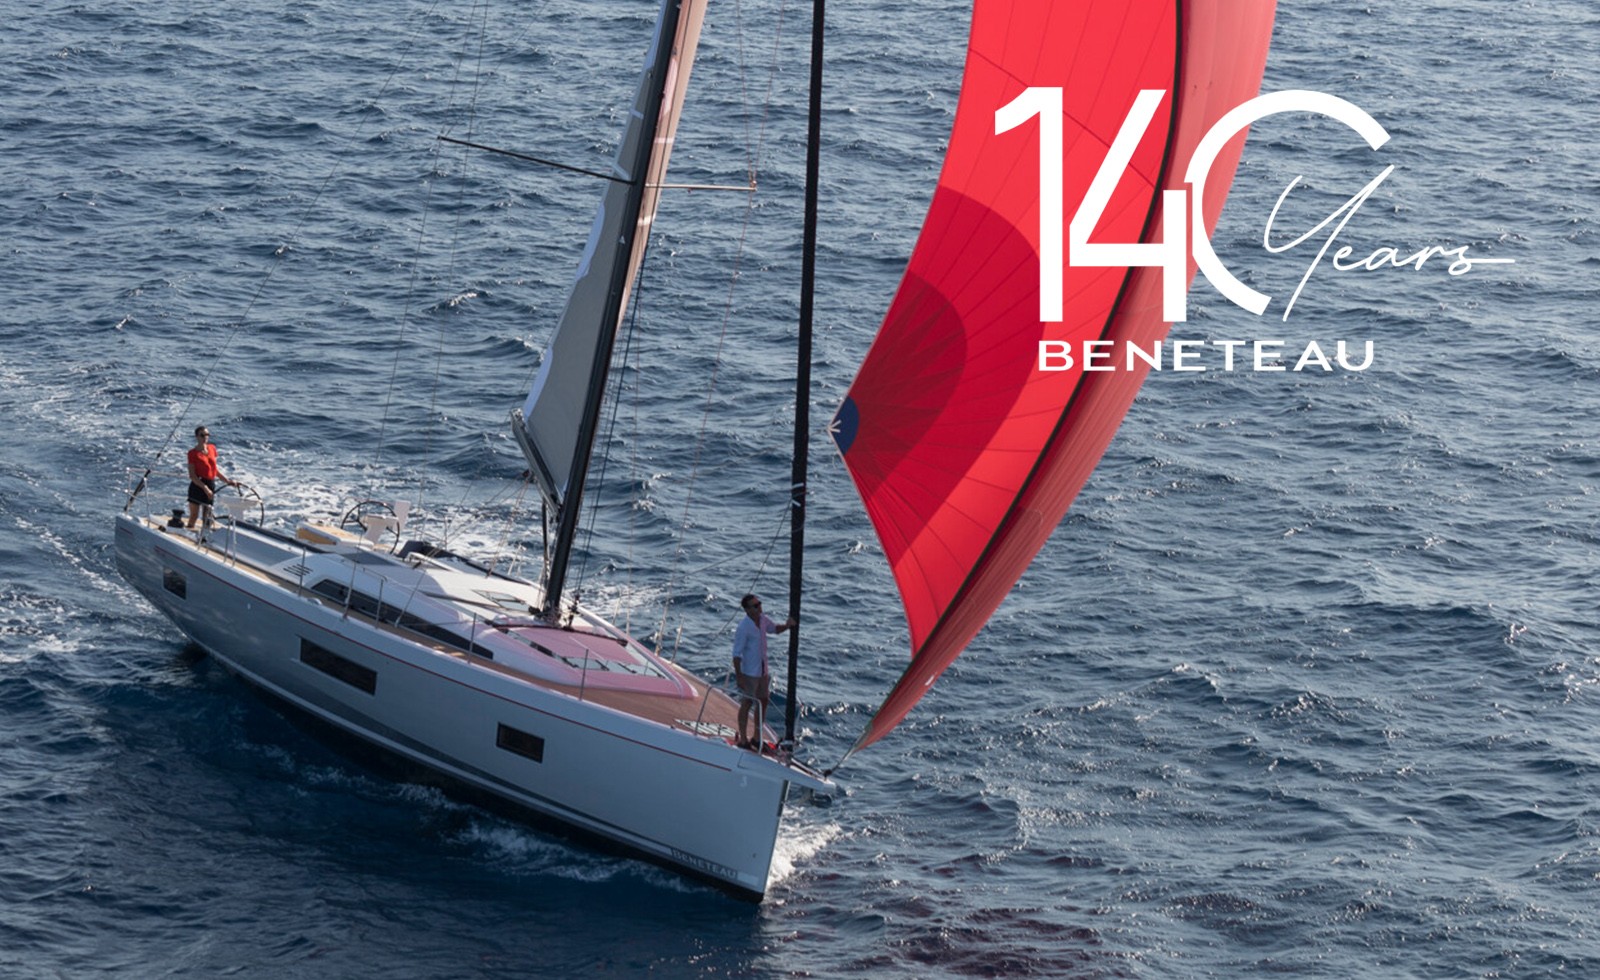 Beneteau: Celebrating 140 years of exceptional boat-making